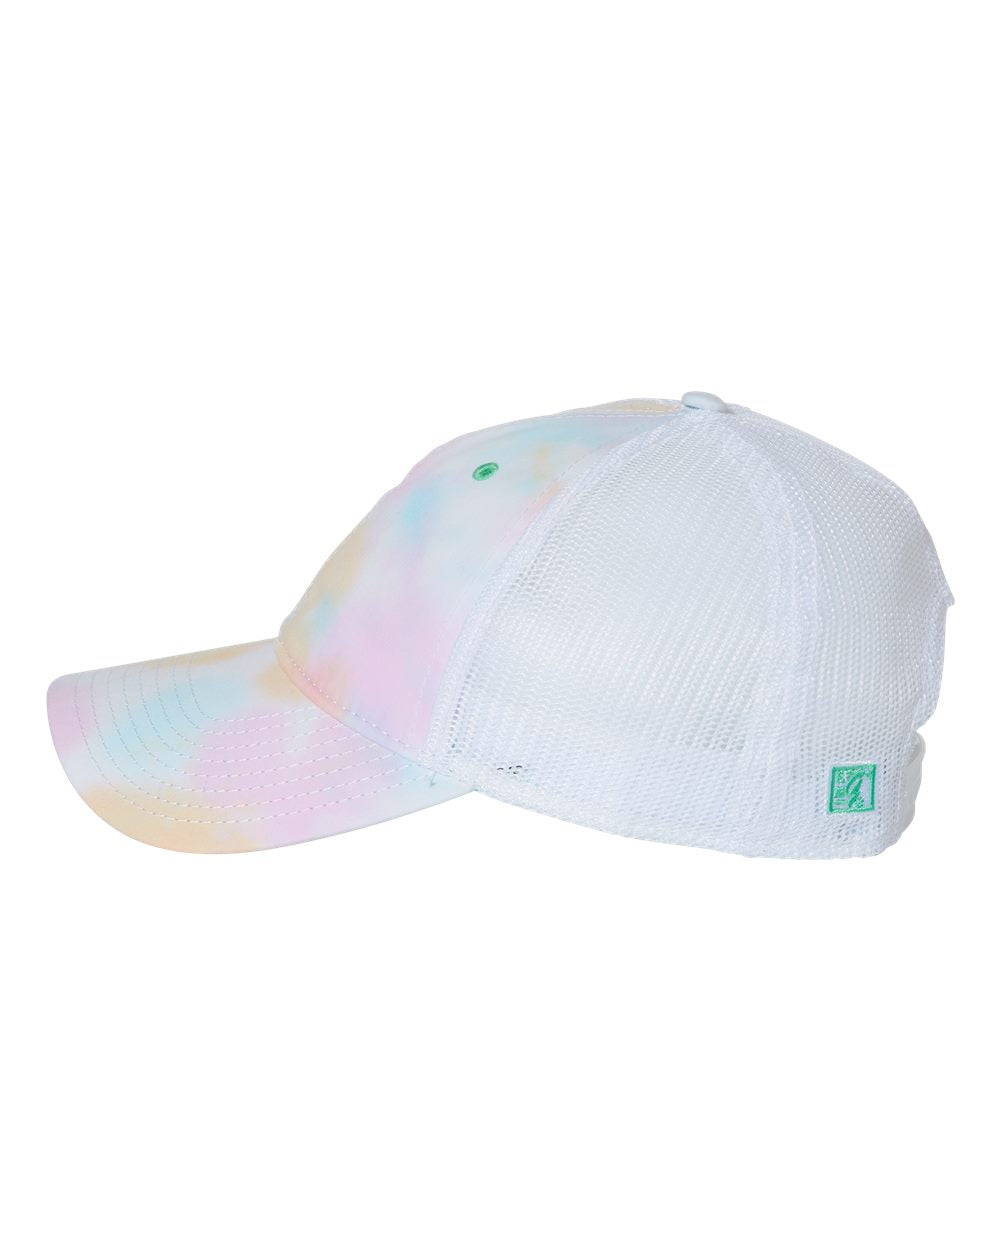 Custom Embroidered The Game GB470 Lido Tie-Dyed Trucker Cap